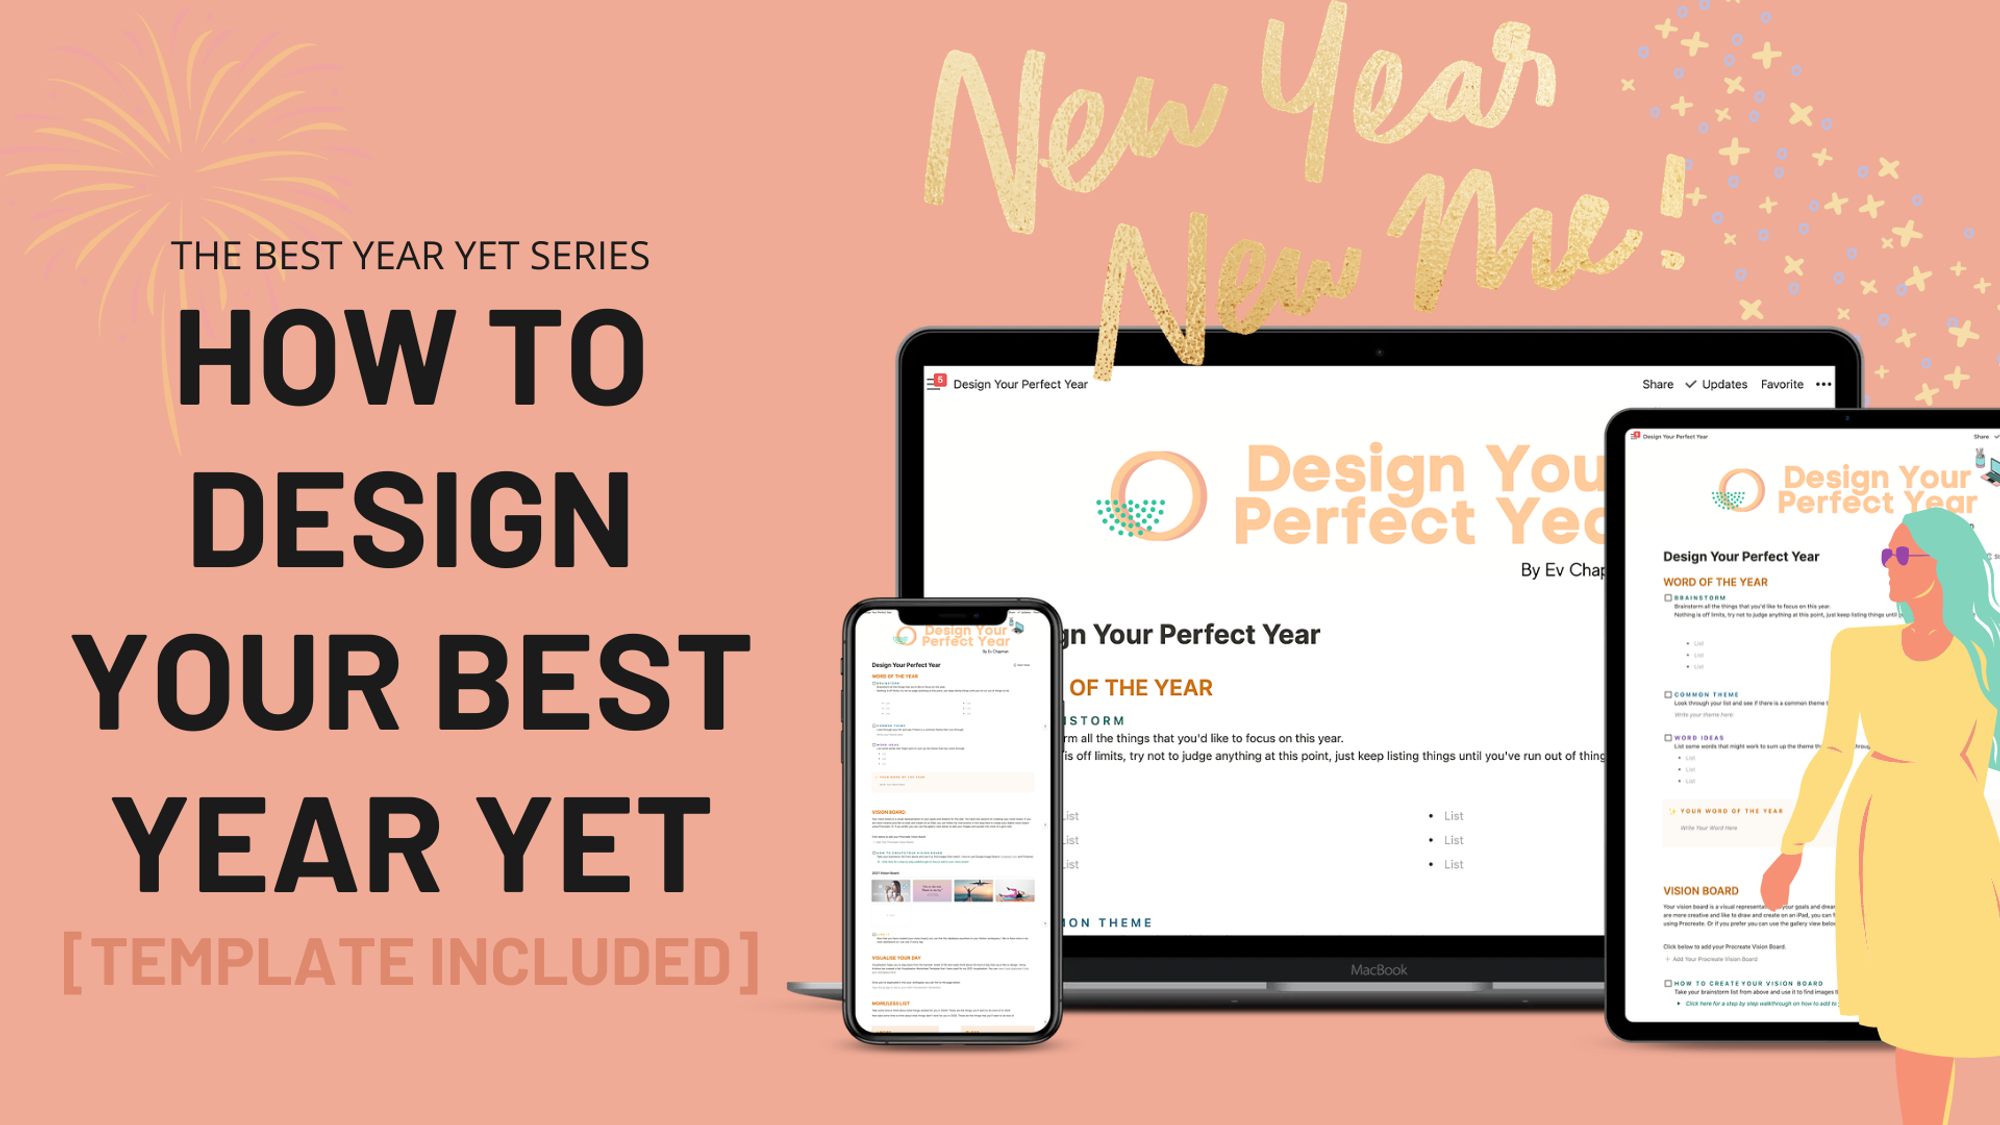 How To Design Your Best Year Yet